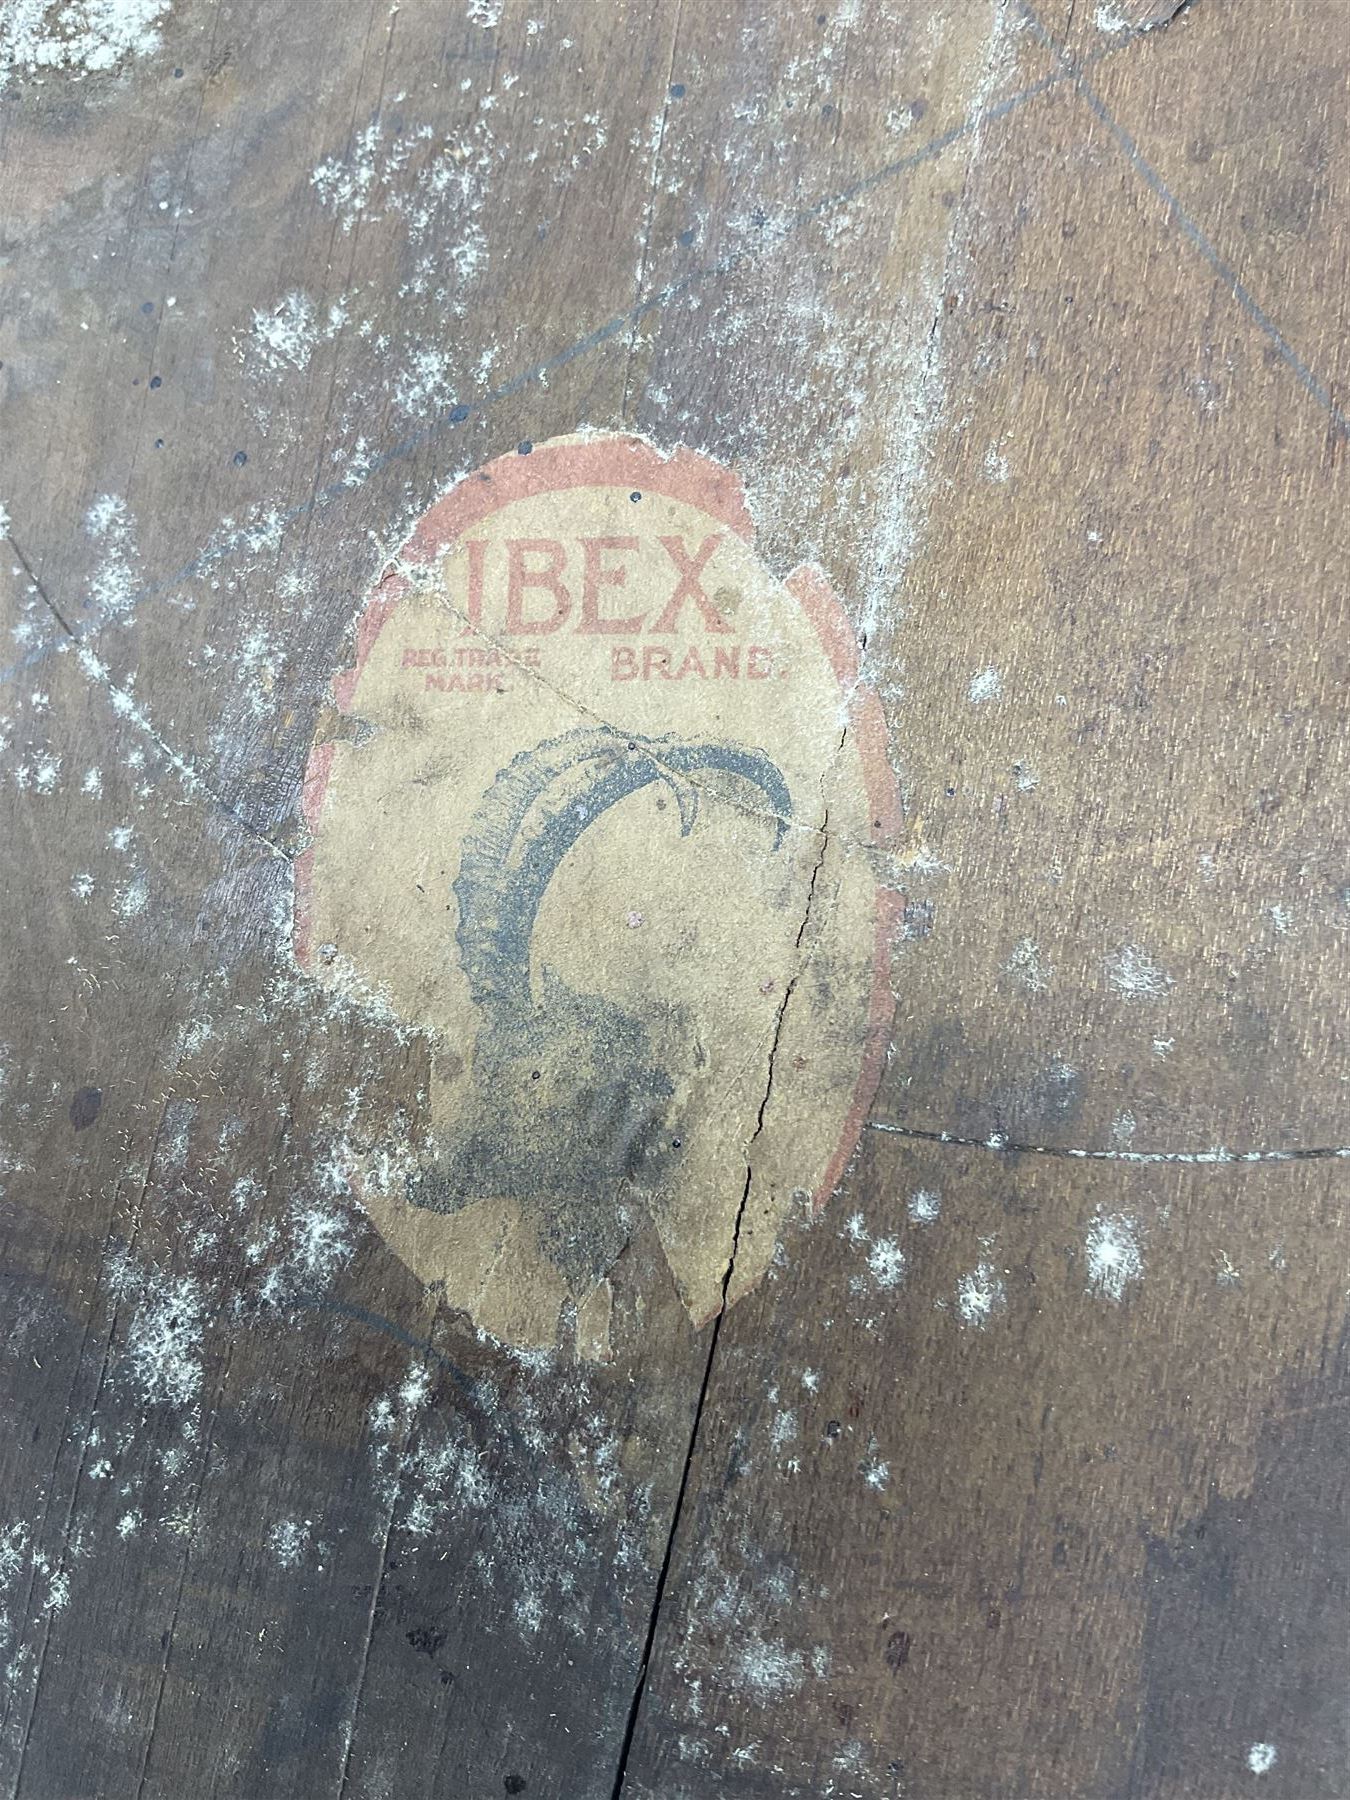 Late 19th century stained beech 'Penny' chair with "Ibex" label underneath - Image 7 of 7